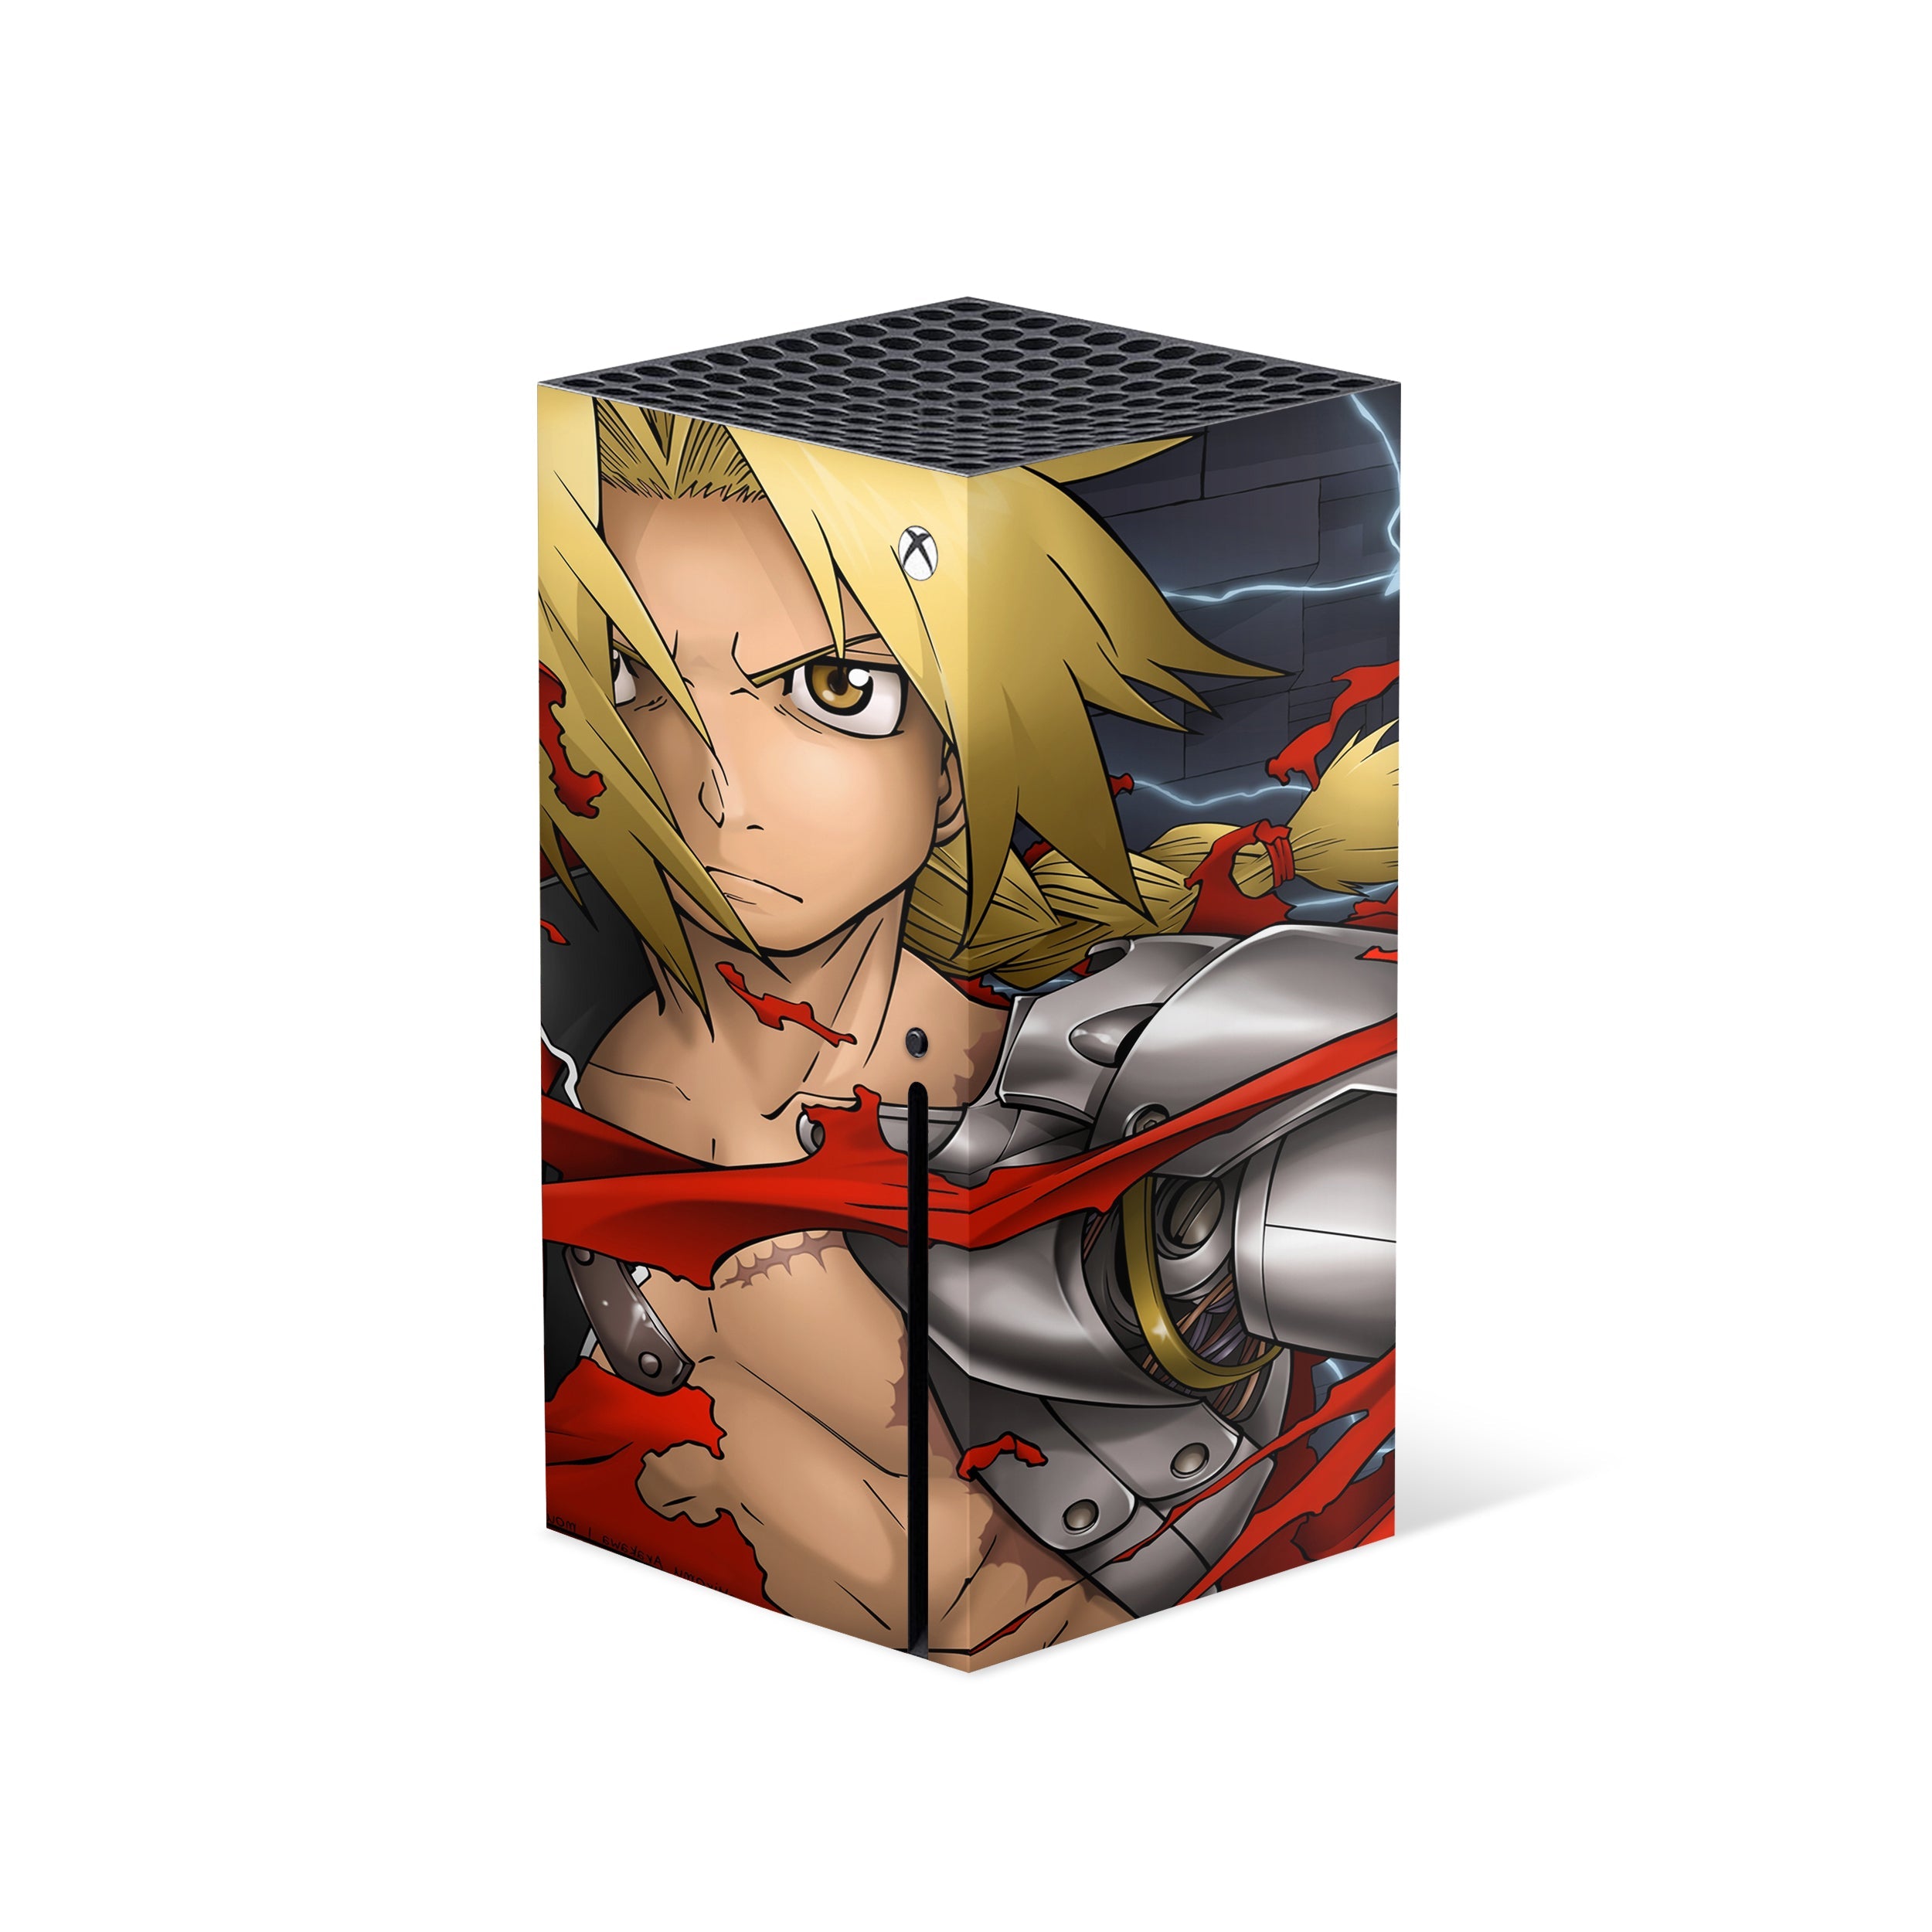 A video game skin featuring a Fullmetal Alchemist Edward Elric design for the Xbox Series X.